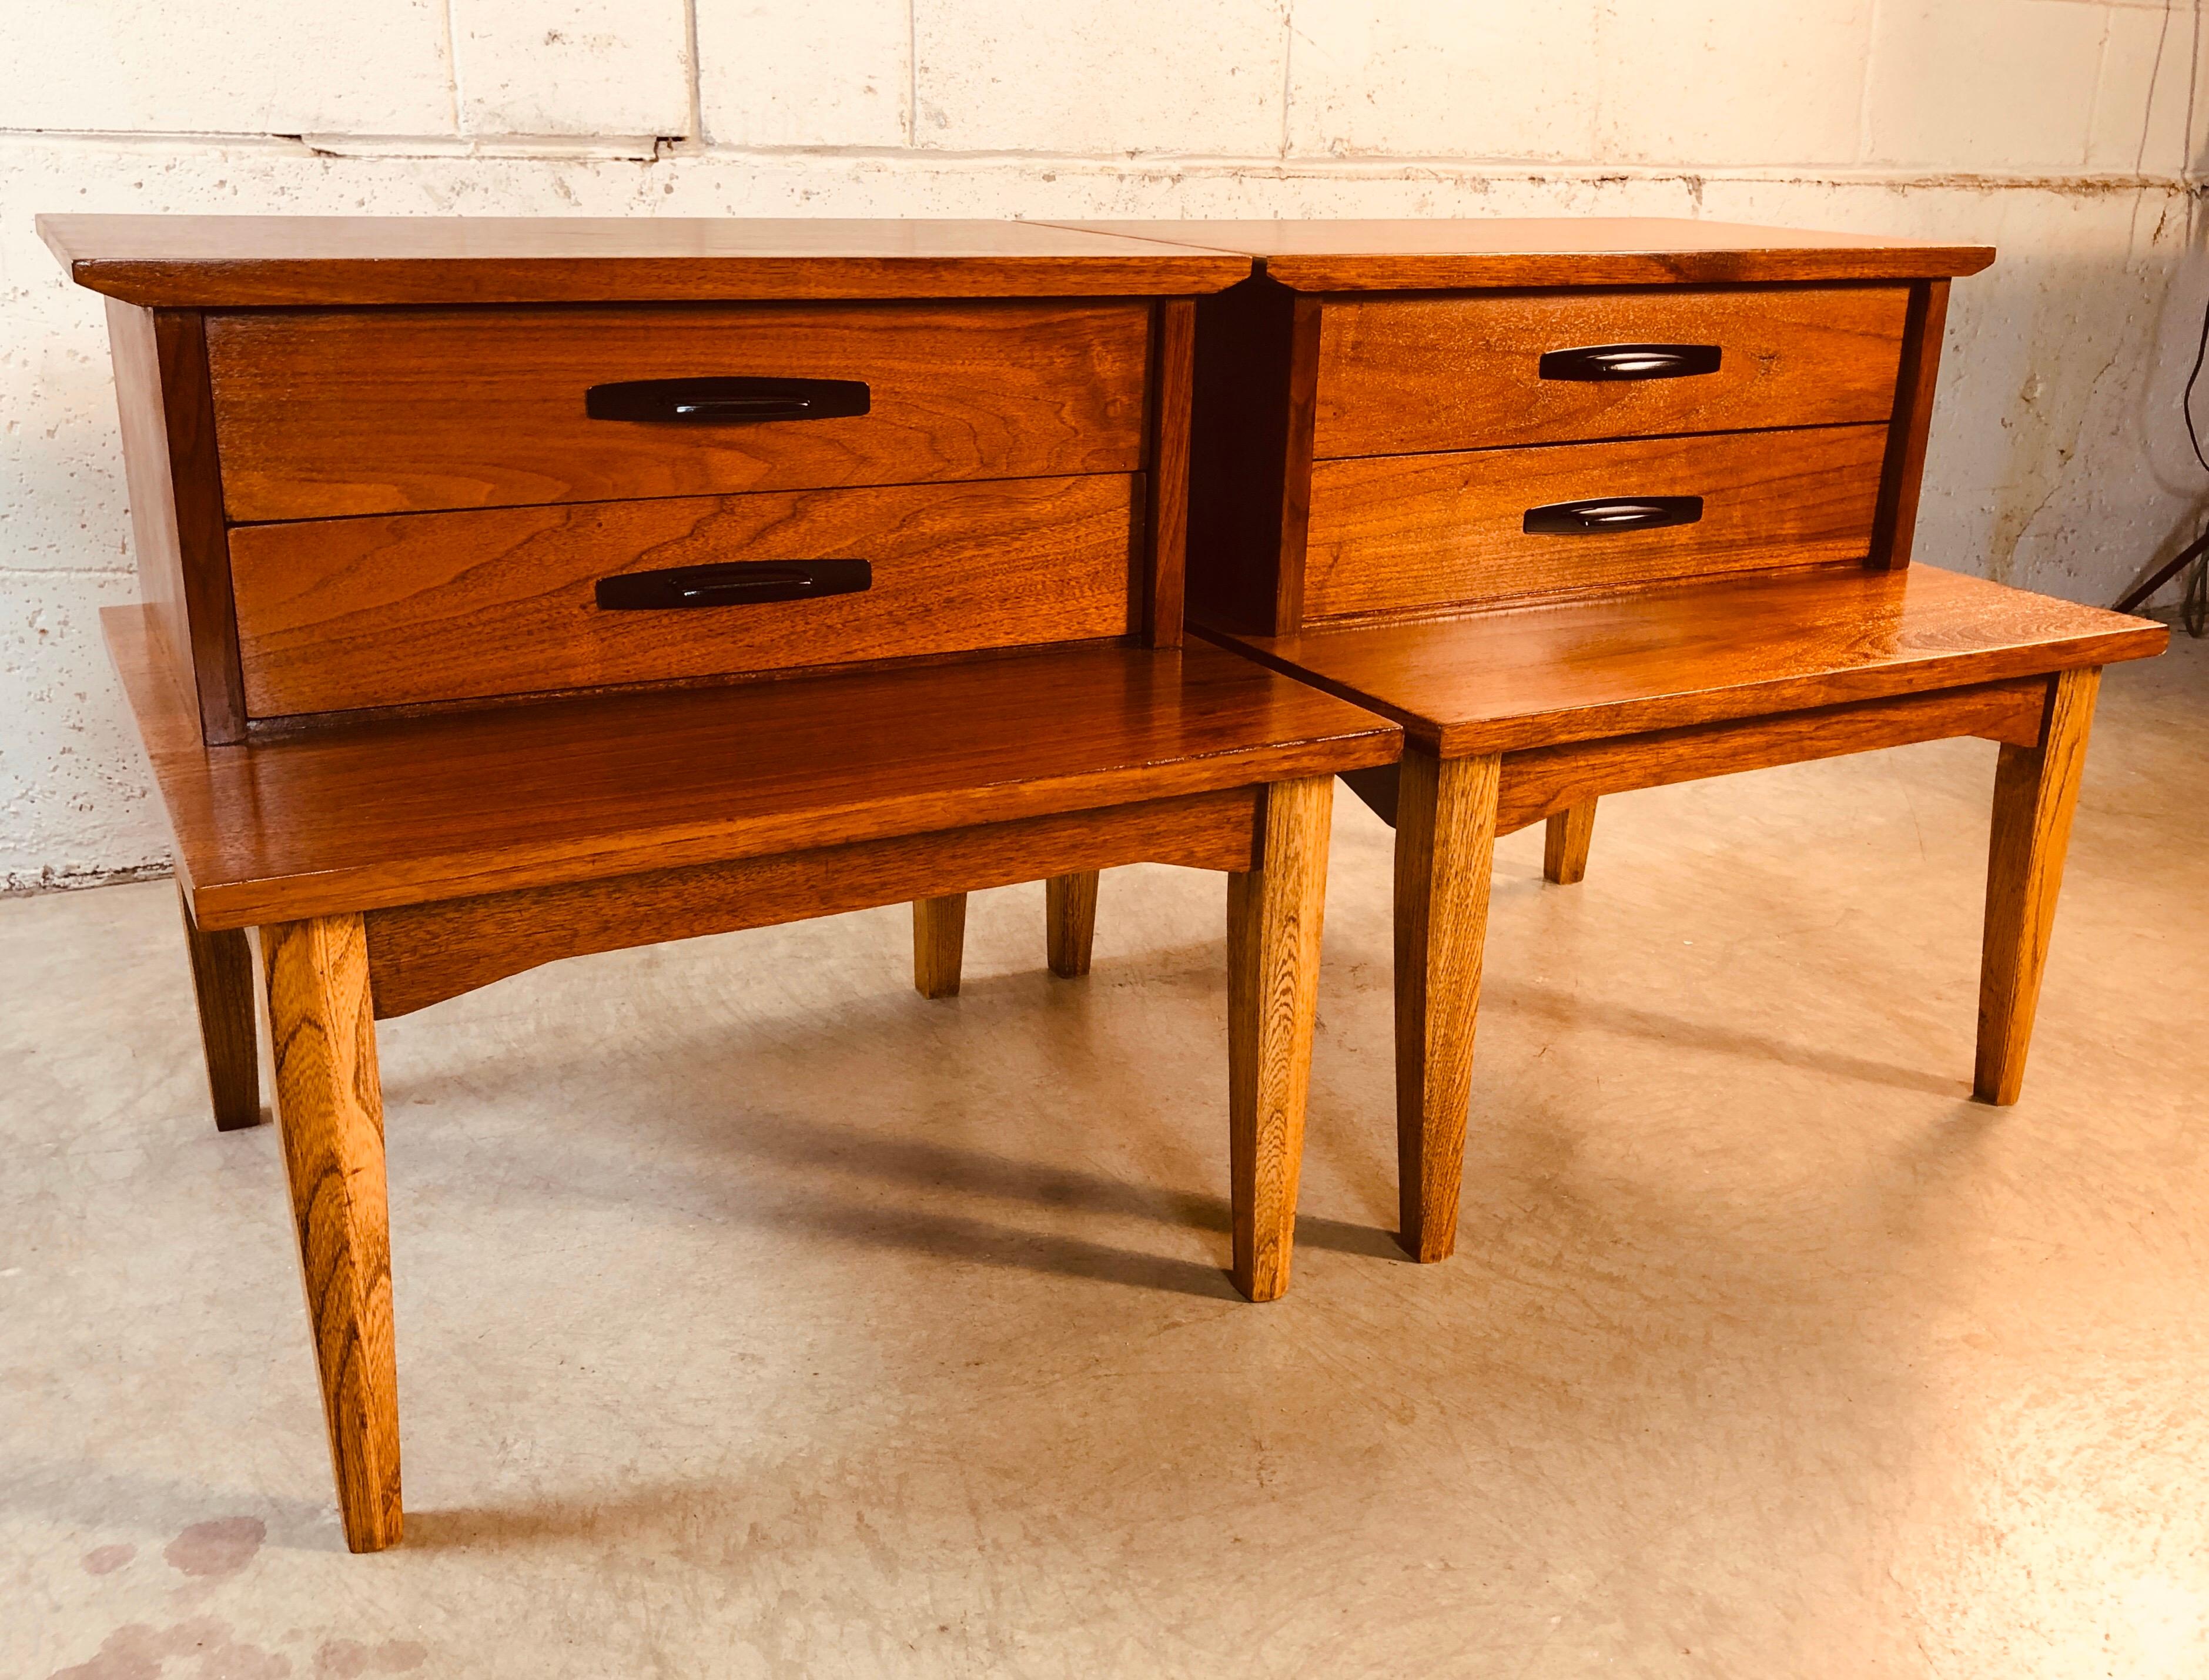 20th Century 1960s Walnut Wood Step-Back Nightstands by Dixie Furniture Co, Pair For Sale